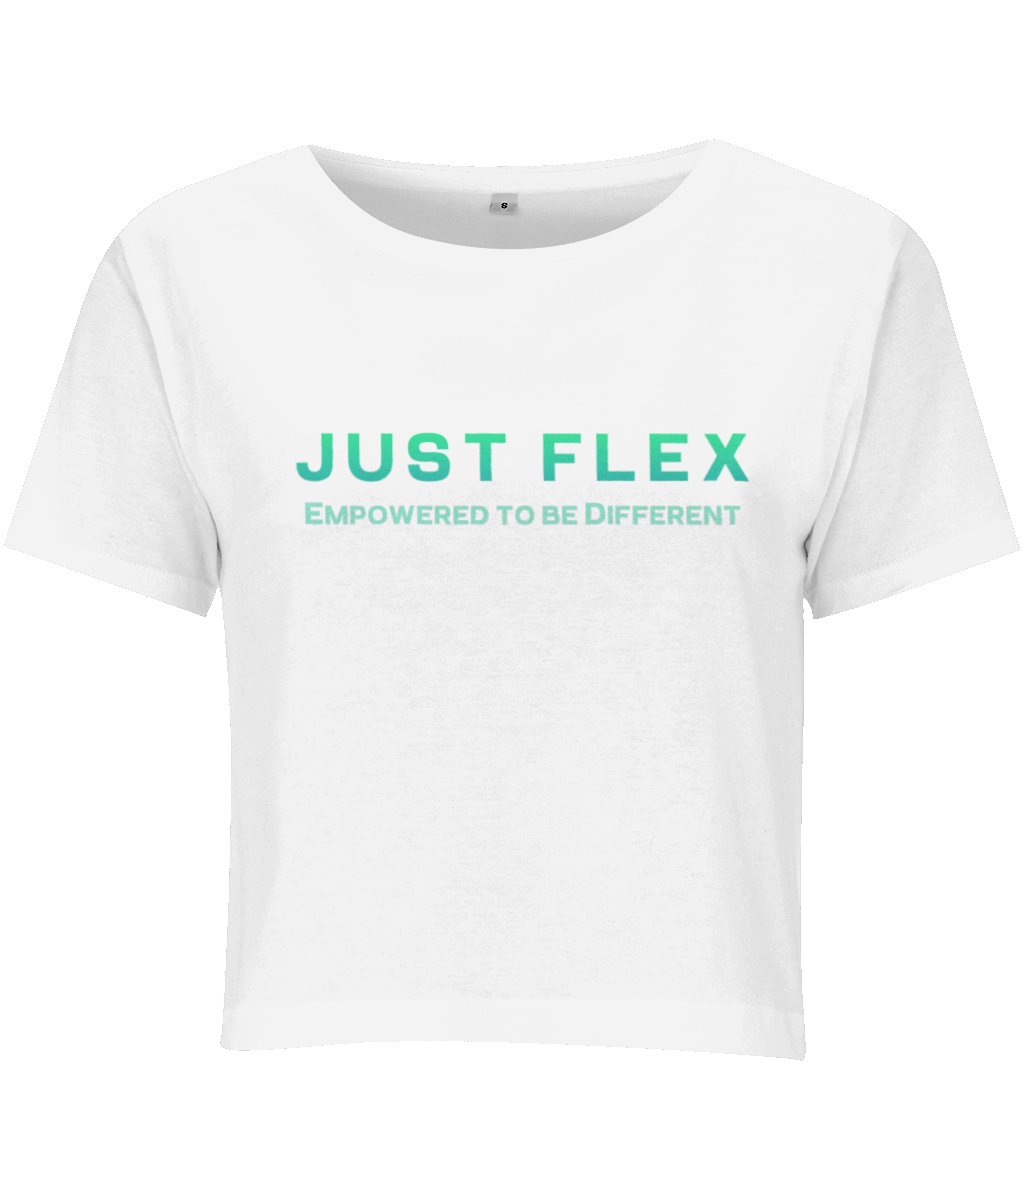 Just Flex - Empowered To Be Different Women's Cropped Tee